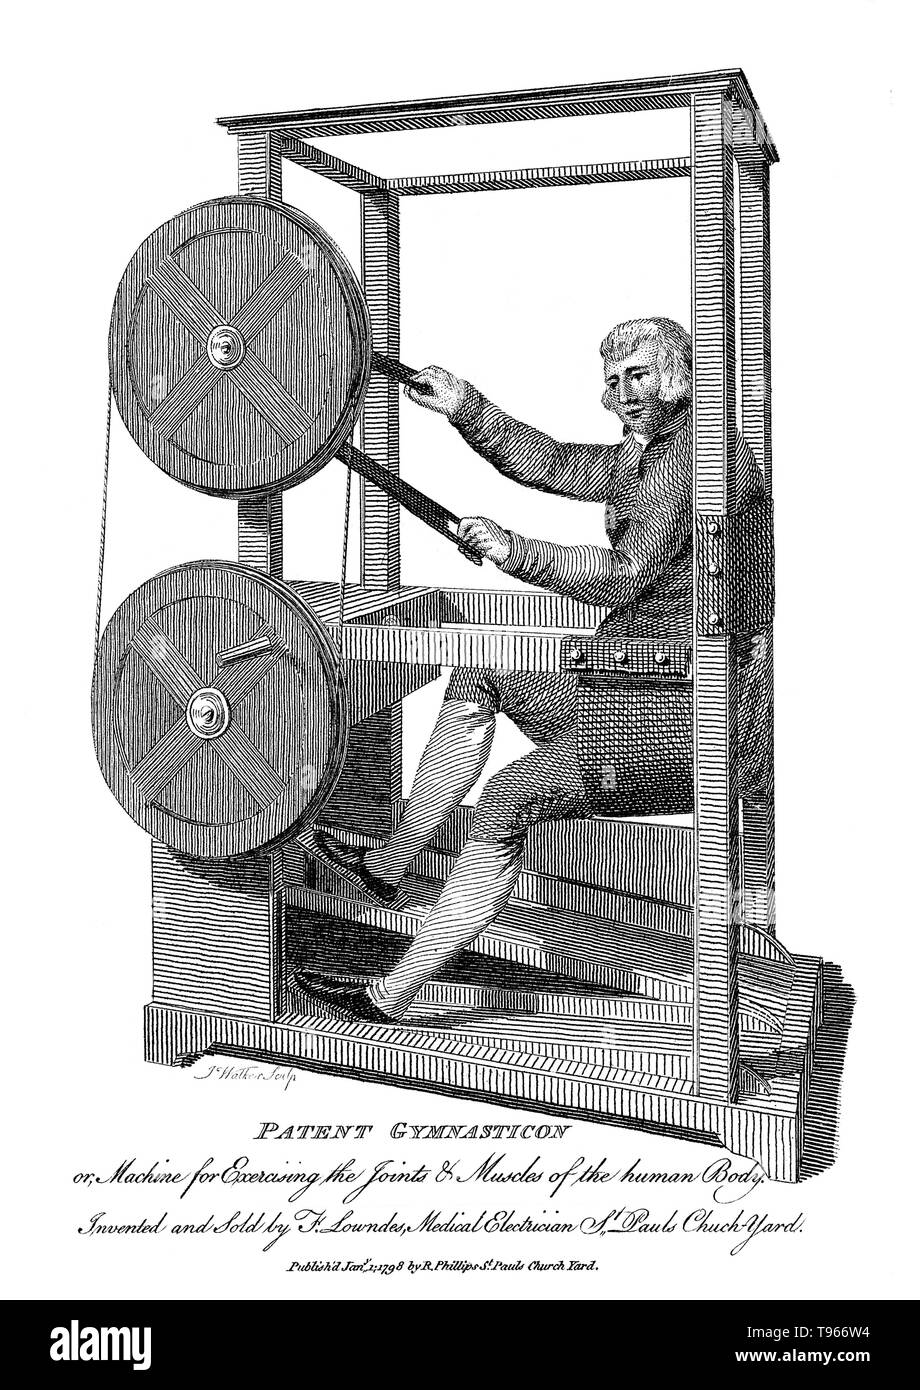 The Gymnasticon was an early exercise machine resembling a stationary bicycle, invented in 1796 by Francis Lowndes. In his patent, Lowndes described the machine as intended simply to give and apply motion and exercise, voluntary or involuntary, to the limbs, joints, and muscles of the human body. The Gymnasticon depended on a set of flywheels that connected the wooden treadles for the feet to cranks for the hands, which could drive each other or operate independently. Stock Photo